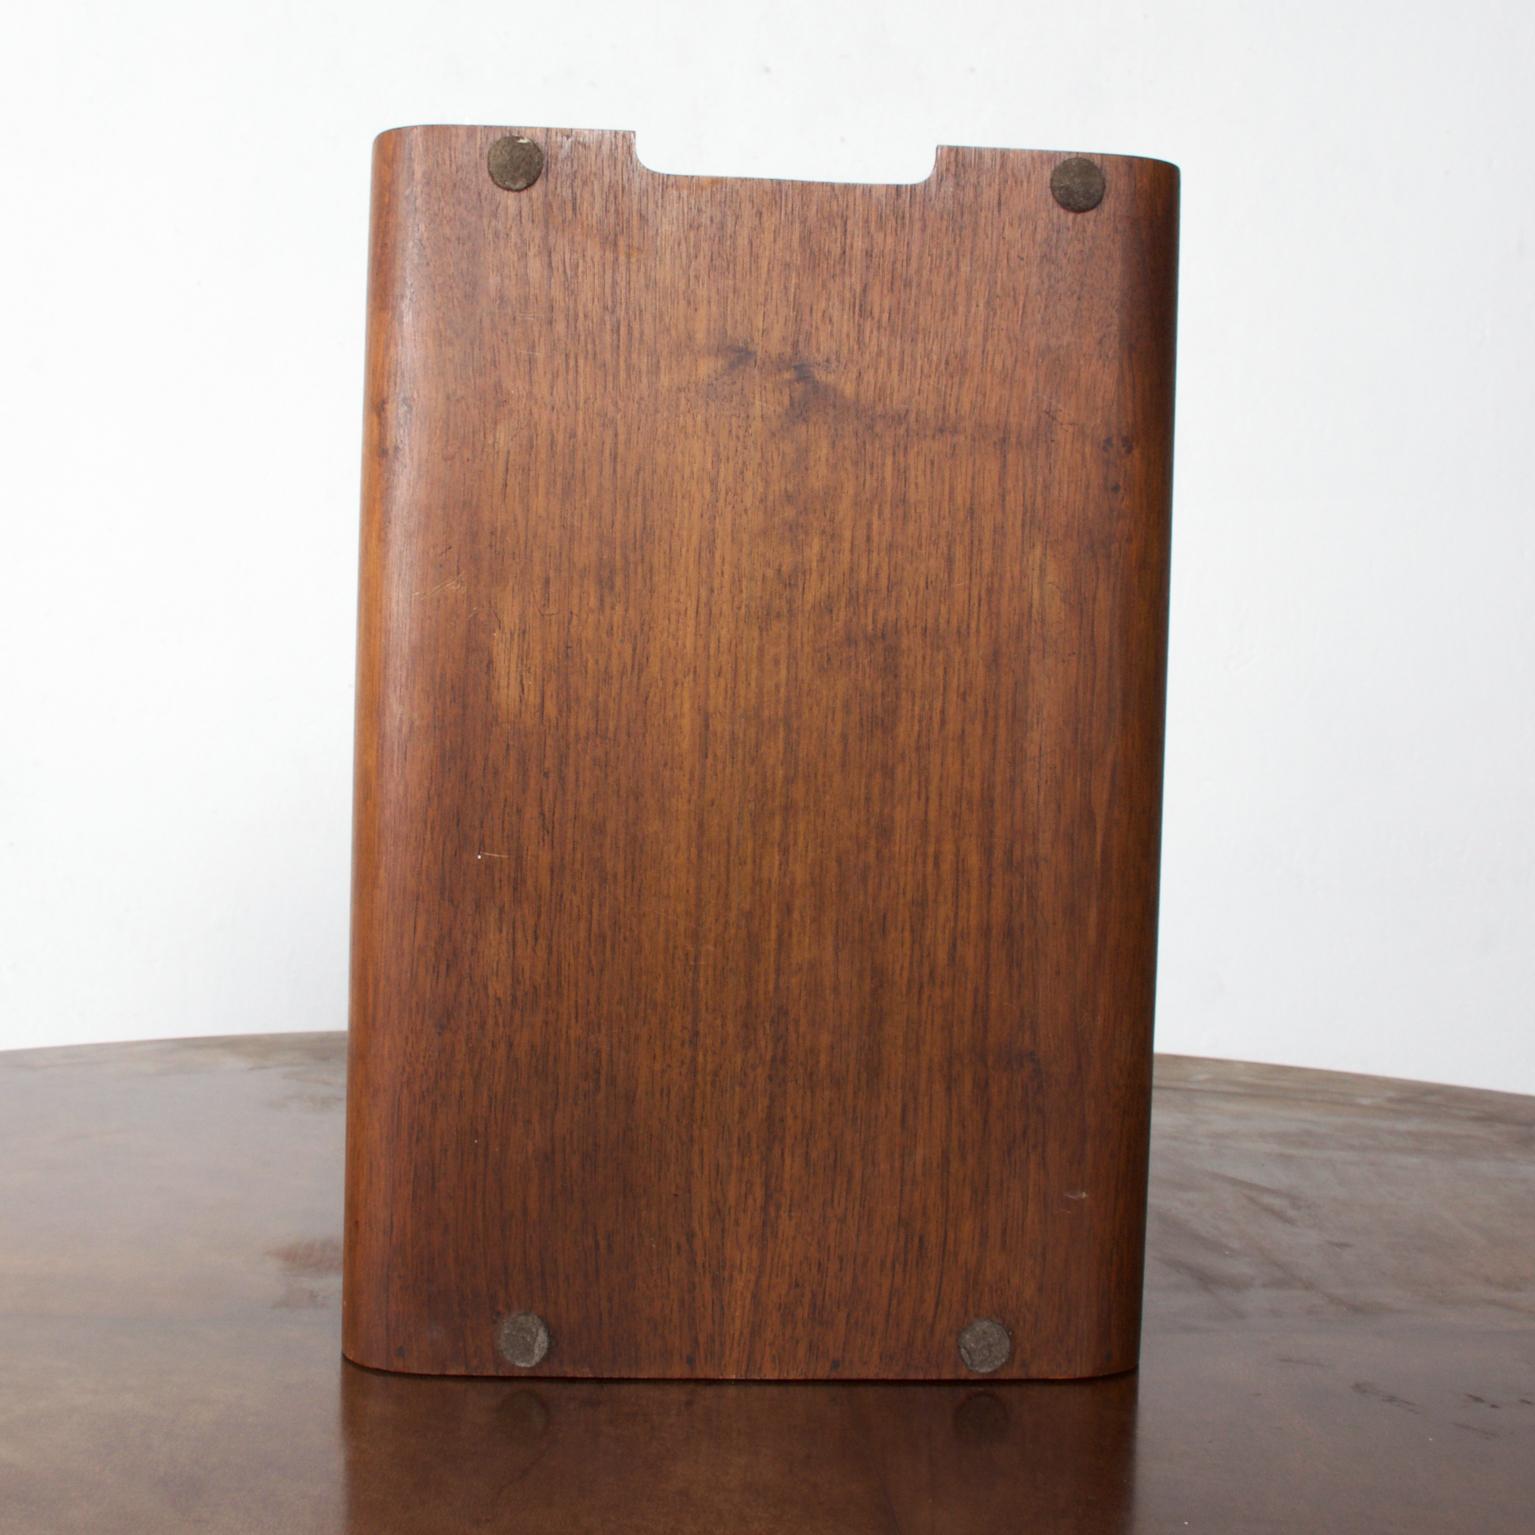 Late 20th Century Mid-Century Modern Bent Plywood Office Desk Paper Holder Tray in Walnut